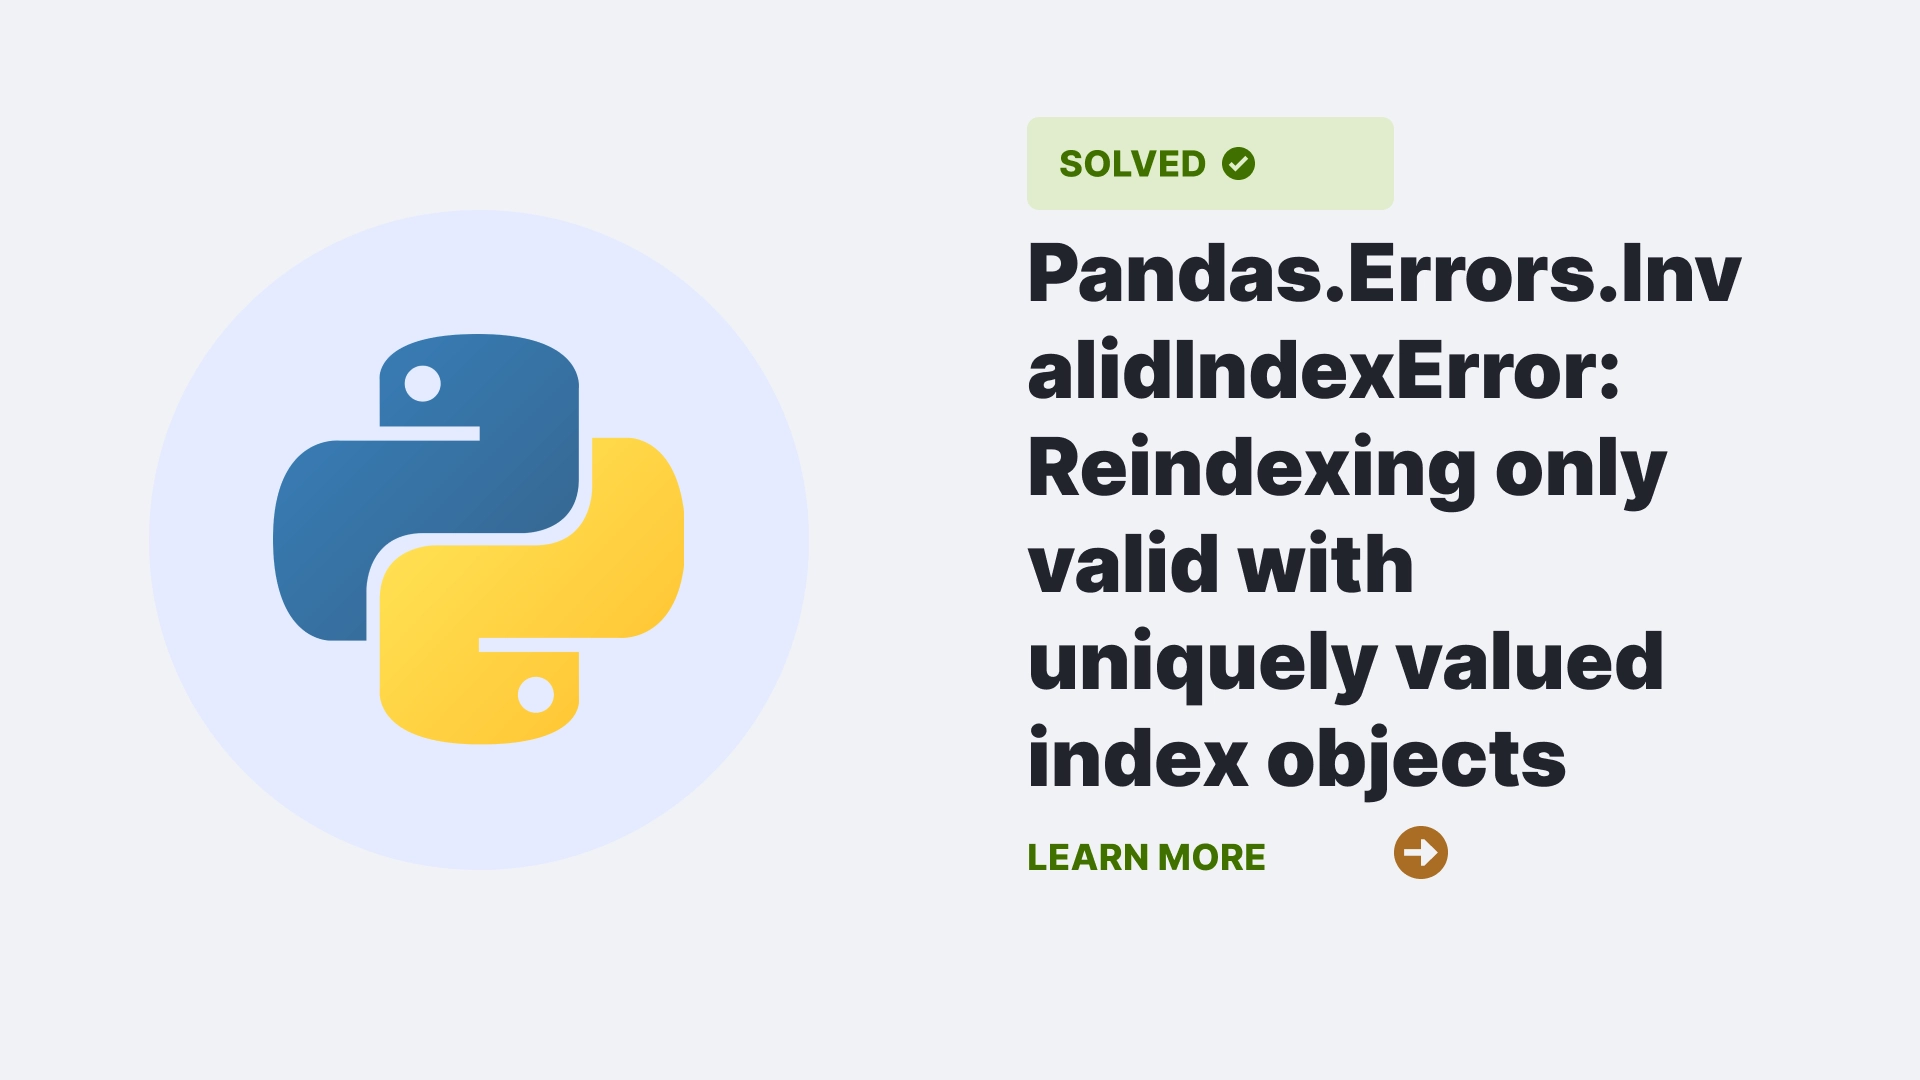 Pandas.Errors.InvalidIndexError: Reindexing only valid with uniquely valued index objects